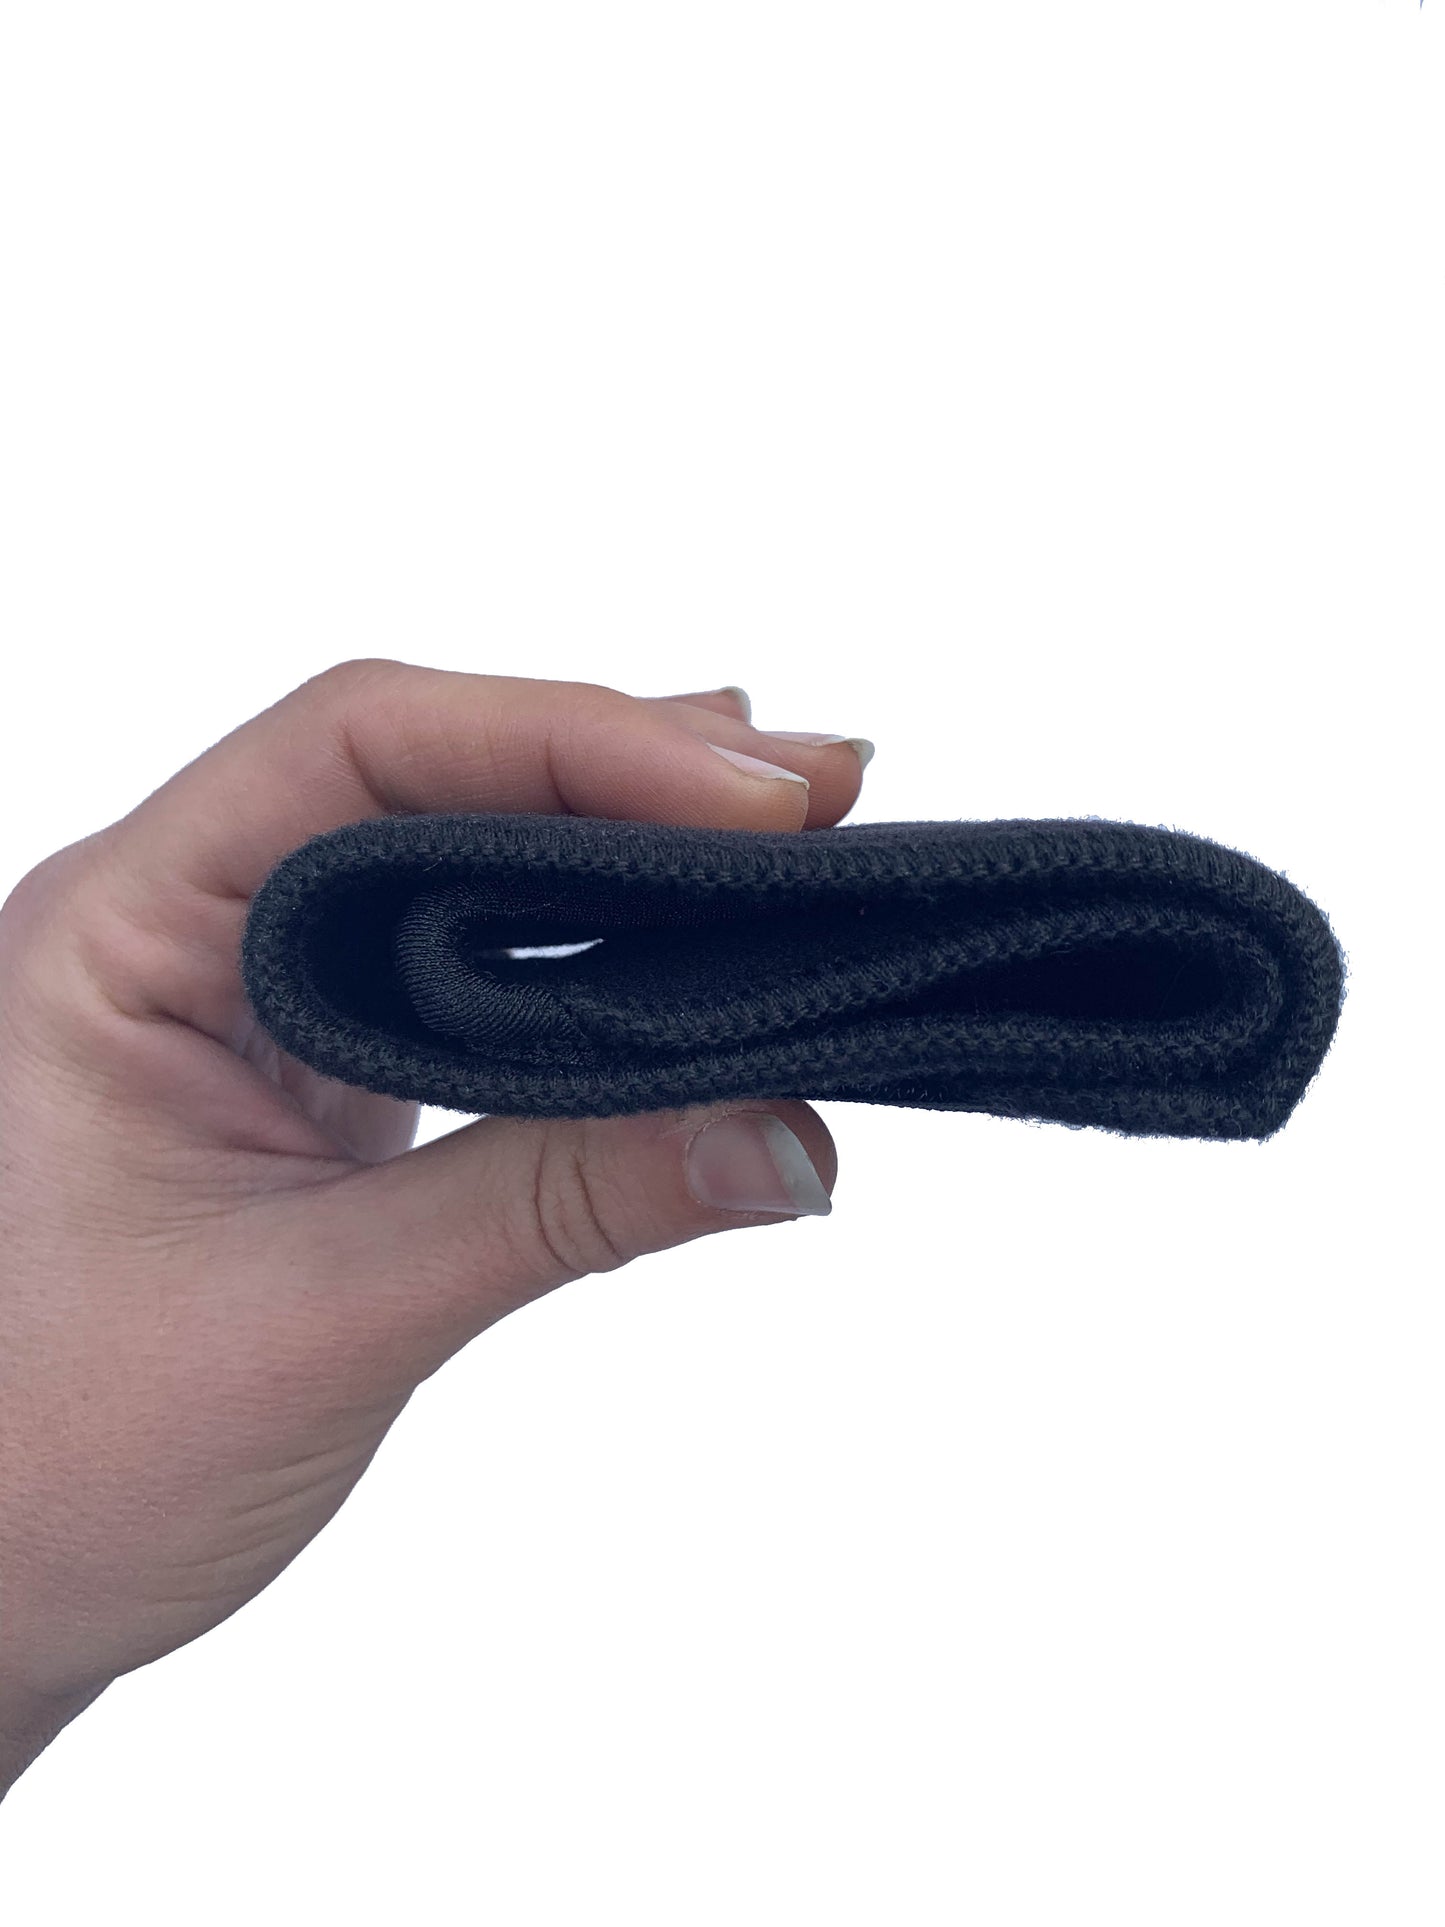 A hand holding the black bio magnetic wrist support folded up, showing how compact it is. 